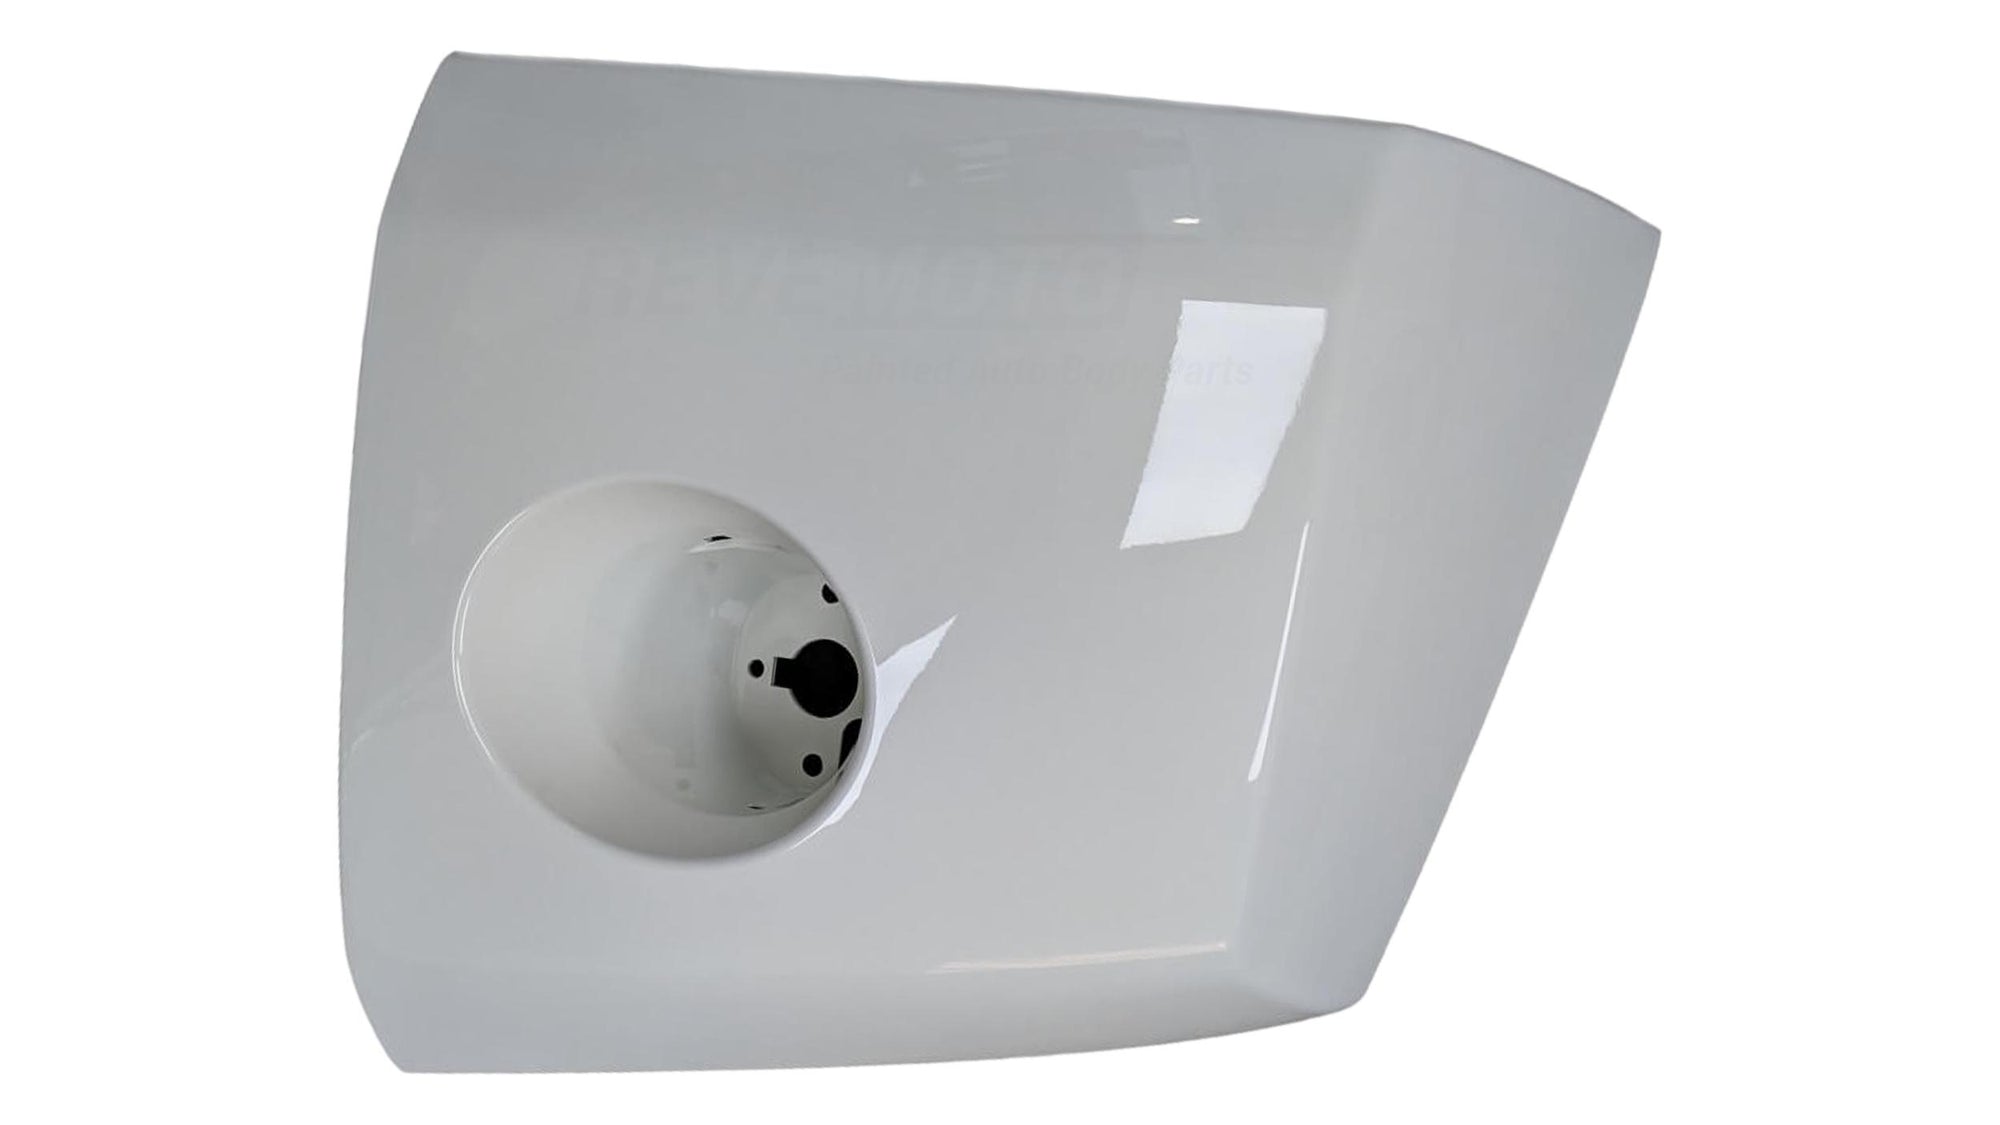 2004-2007 Nissan Armada Front End Cap Painted Nordic White (Q10) 620257S220 NI1004147 (Left, Driver-Side)